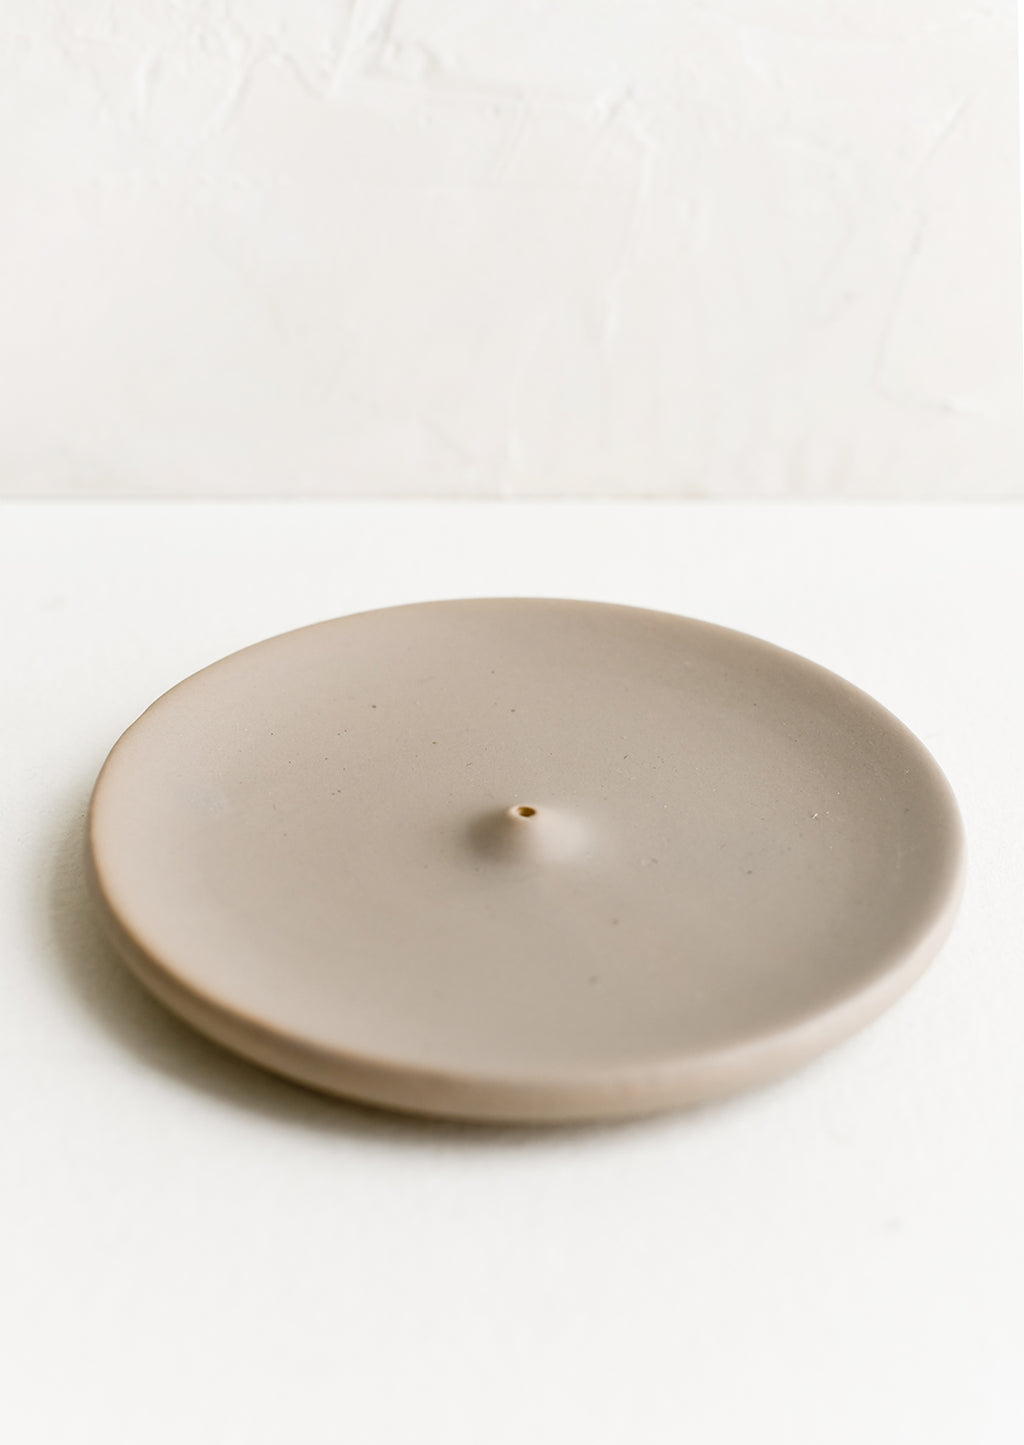 Matte Taupe: A round ceramic incense holder in matte taupe